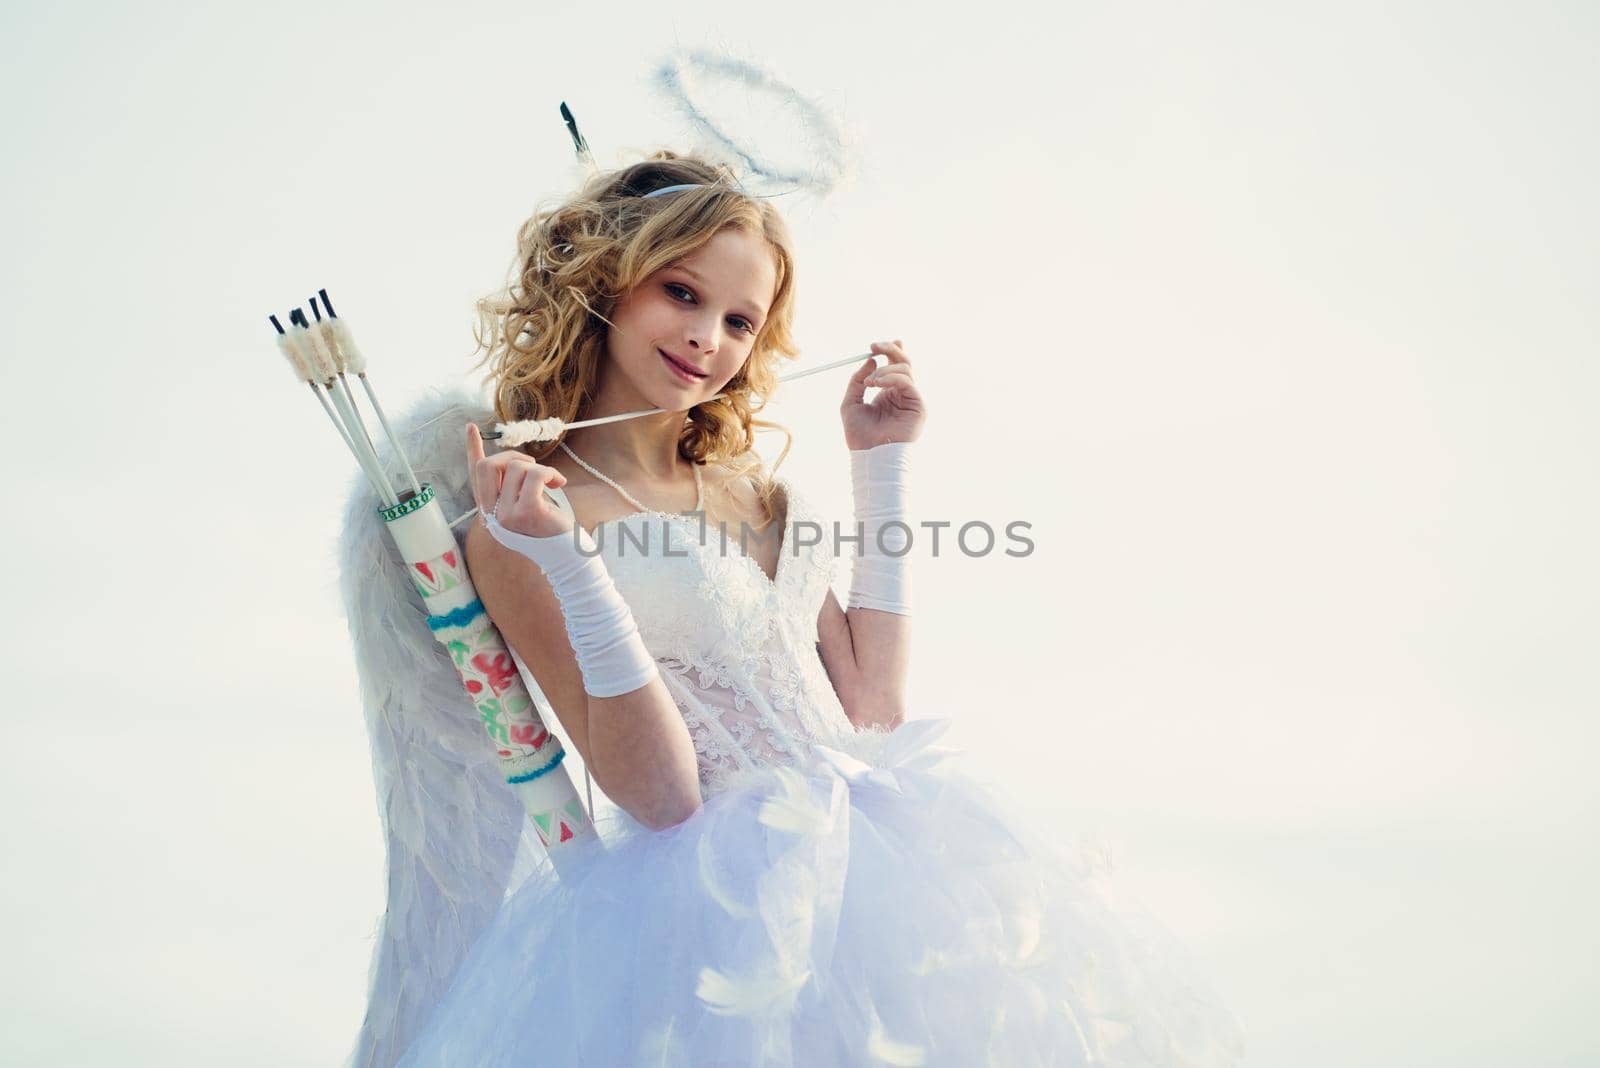 Arrow of love. Cupid in valentine day. Teen angel. Cupid cute angel with bow and arrows. Charming curly little girl in white dress and wings - angel cupid girl by Tverdokhlib